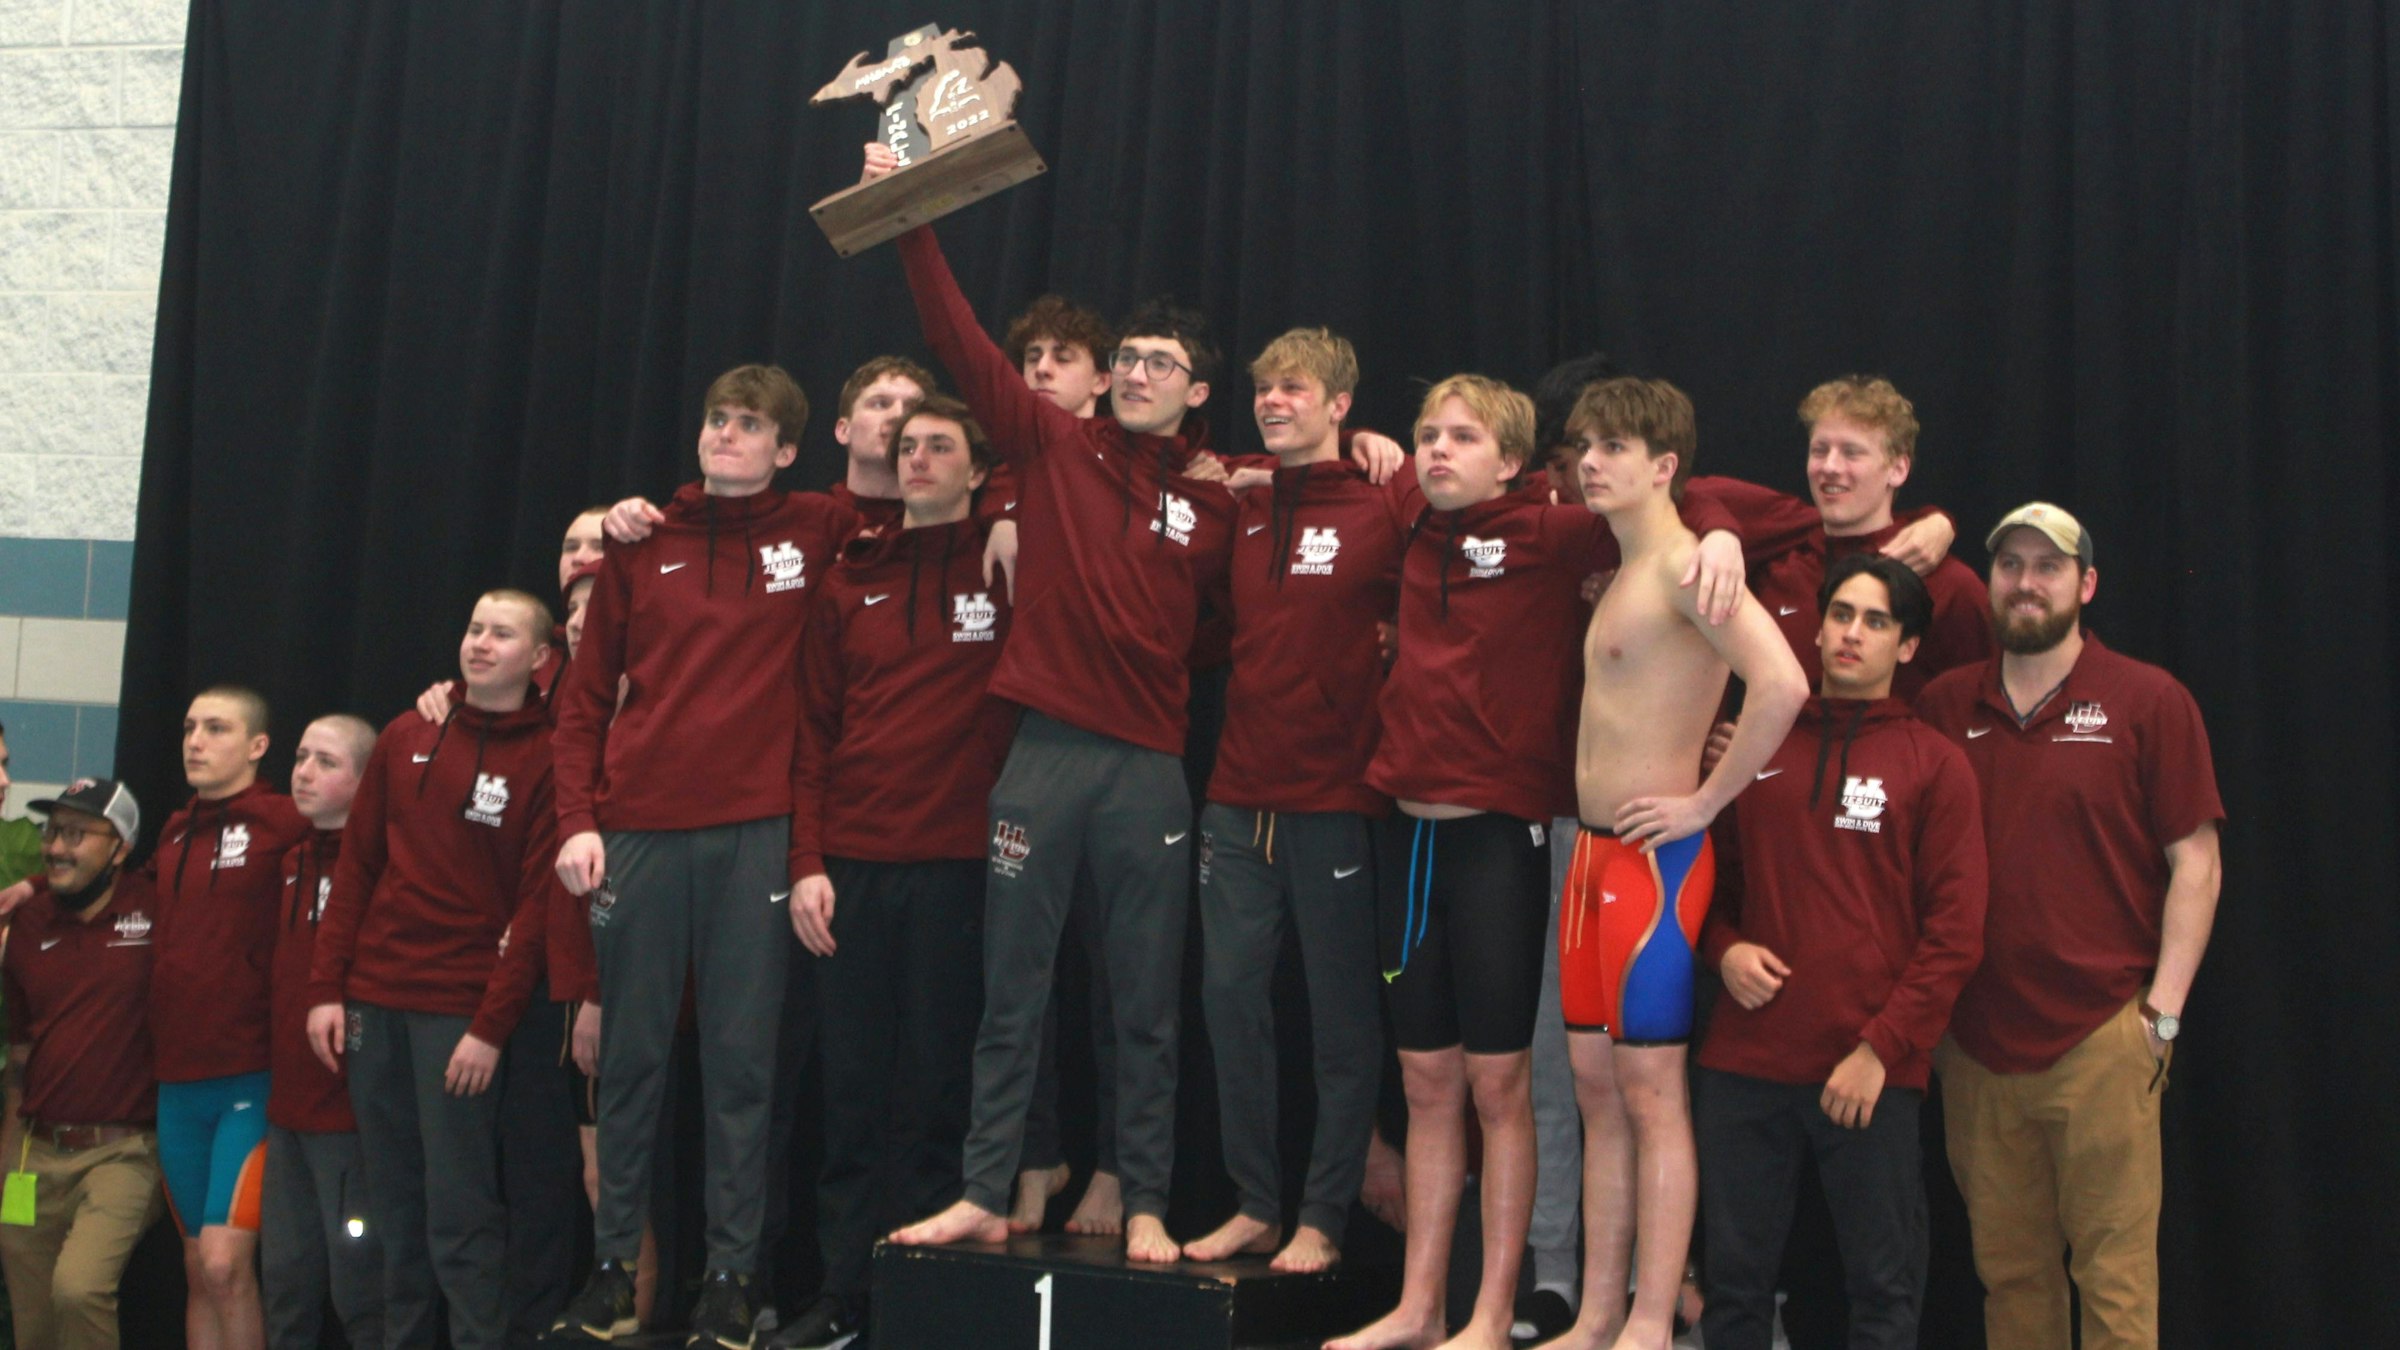 high-water-mark-u-of-d-jesuit-swimmers-finish-as-state-runner-up